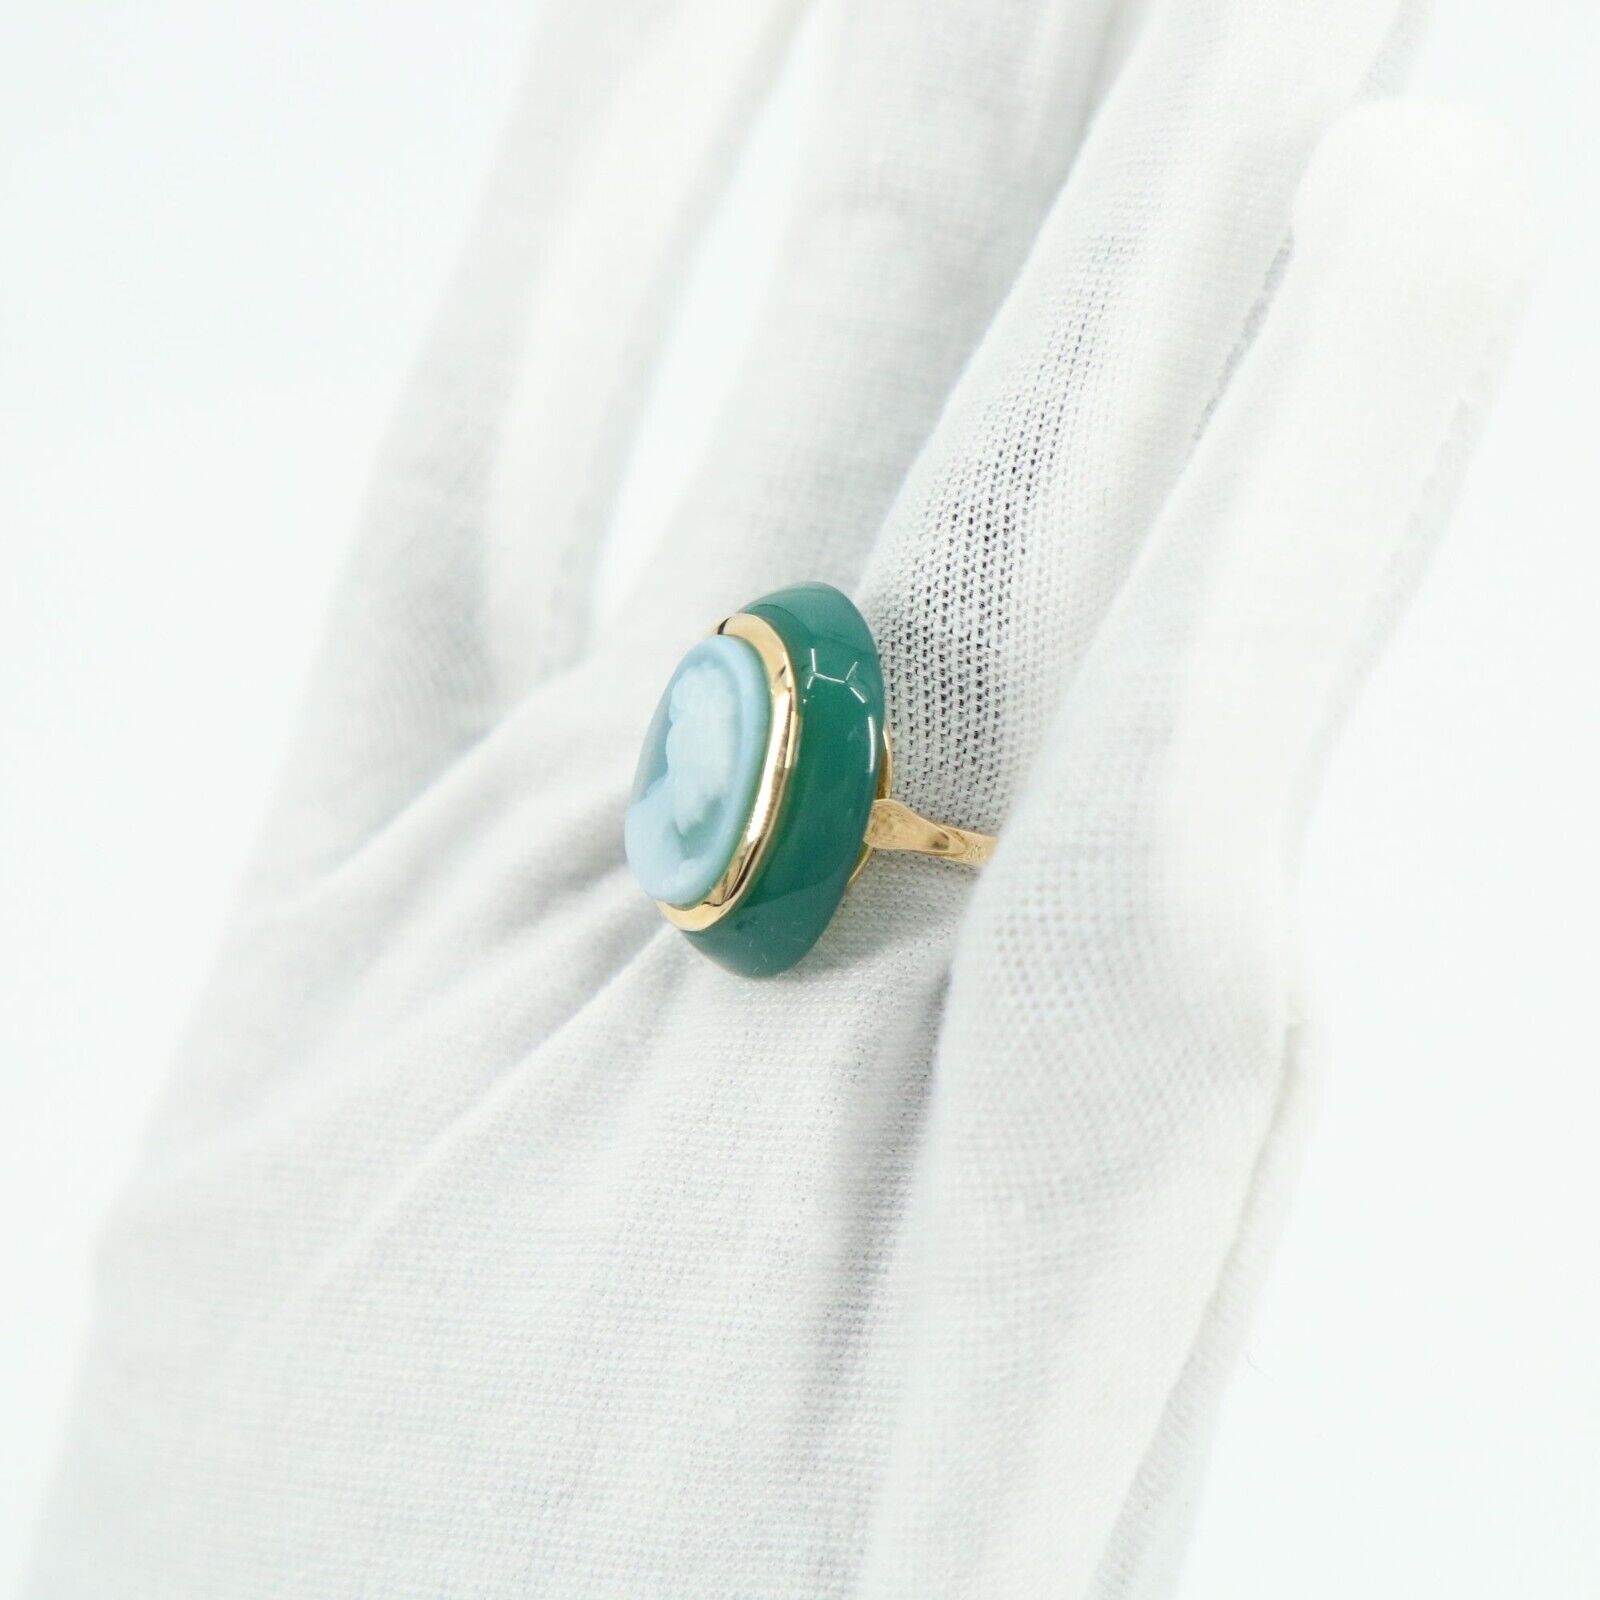 New Giovanni APA Green Agate Hand Carved Shell Cameo 18K Yellow Gold 750 Ring 6. Giovanni APA - фотография #9